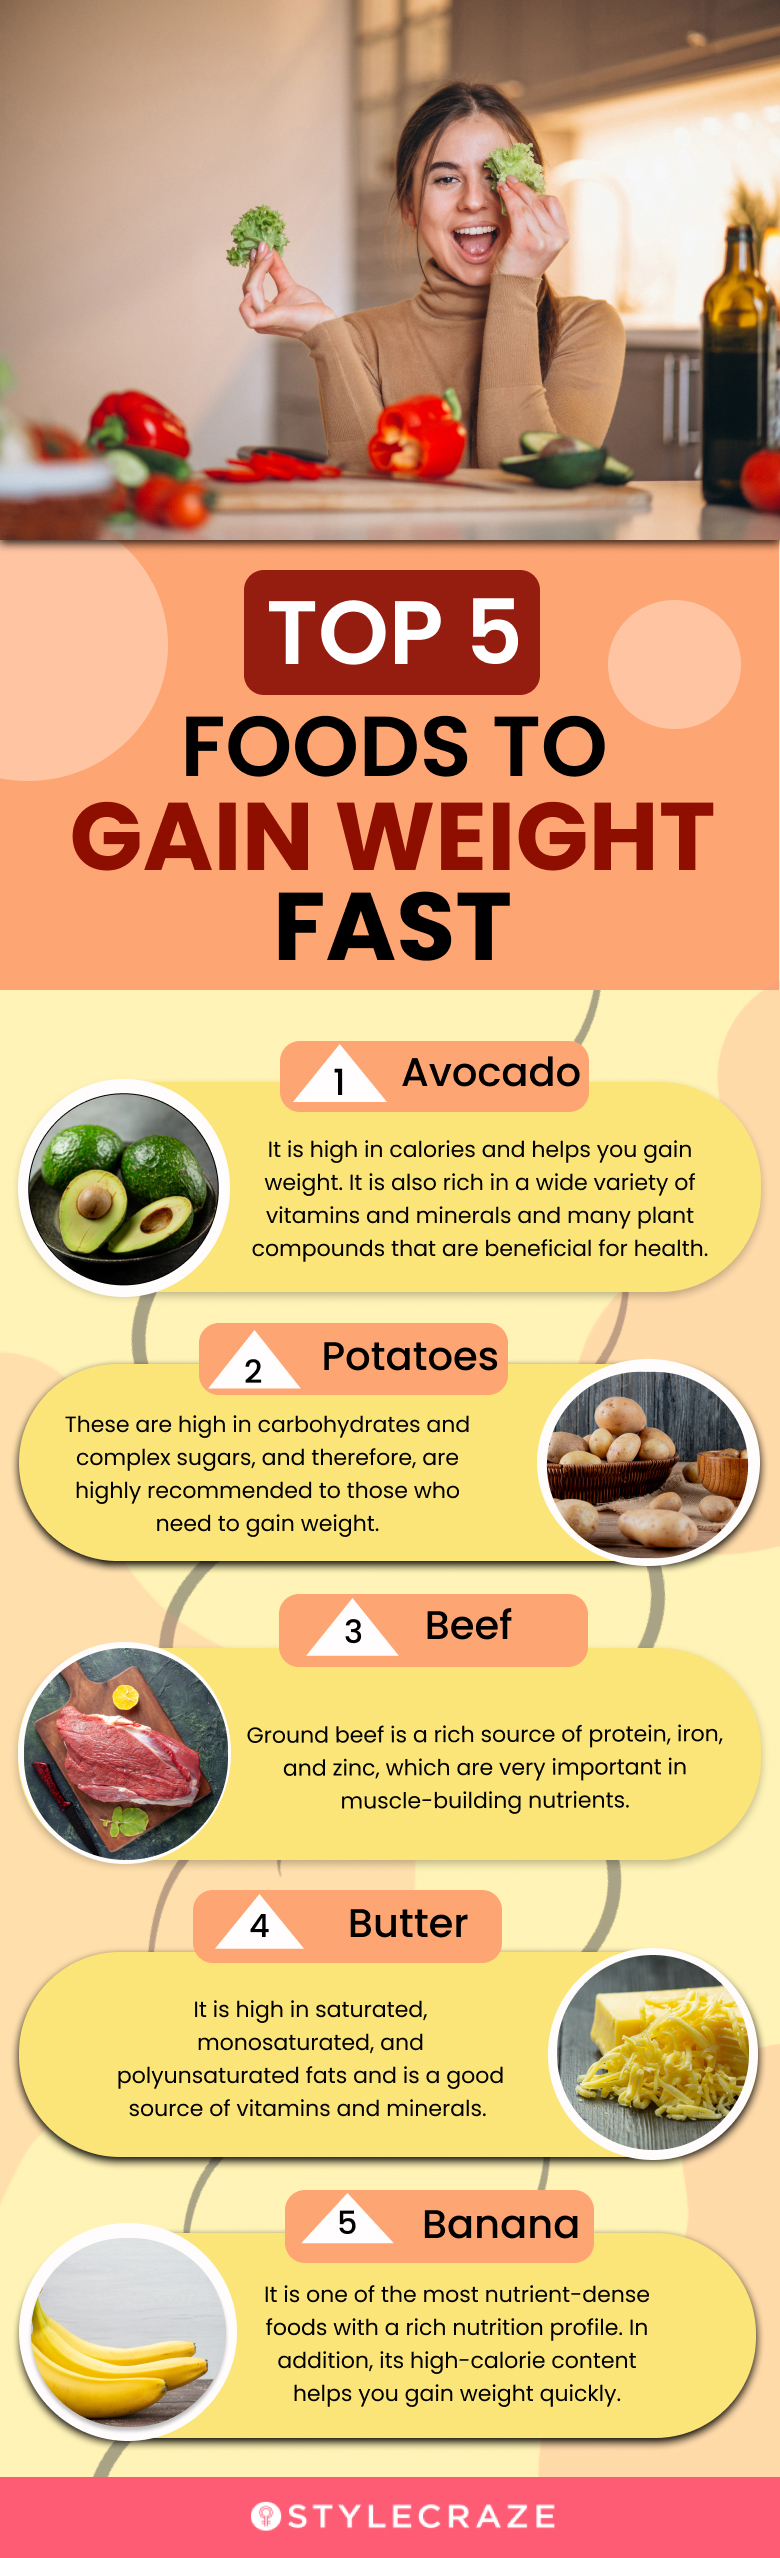 top 5 foods to gain weight fast (infographic)